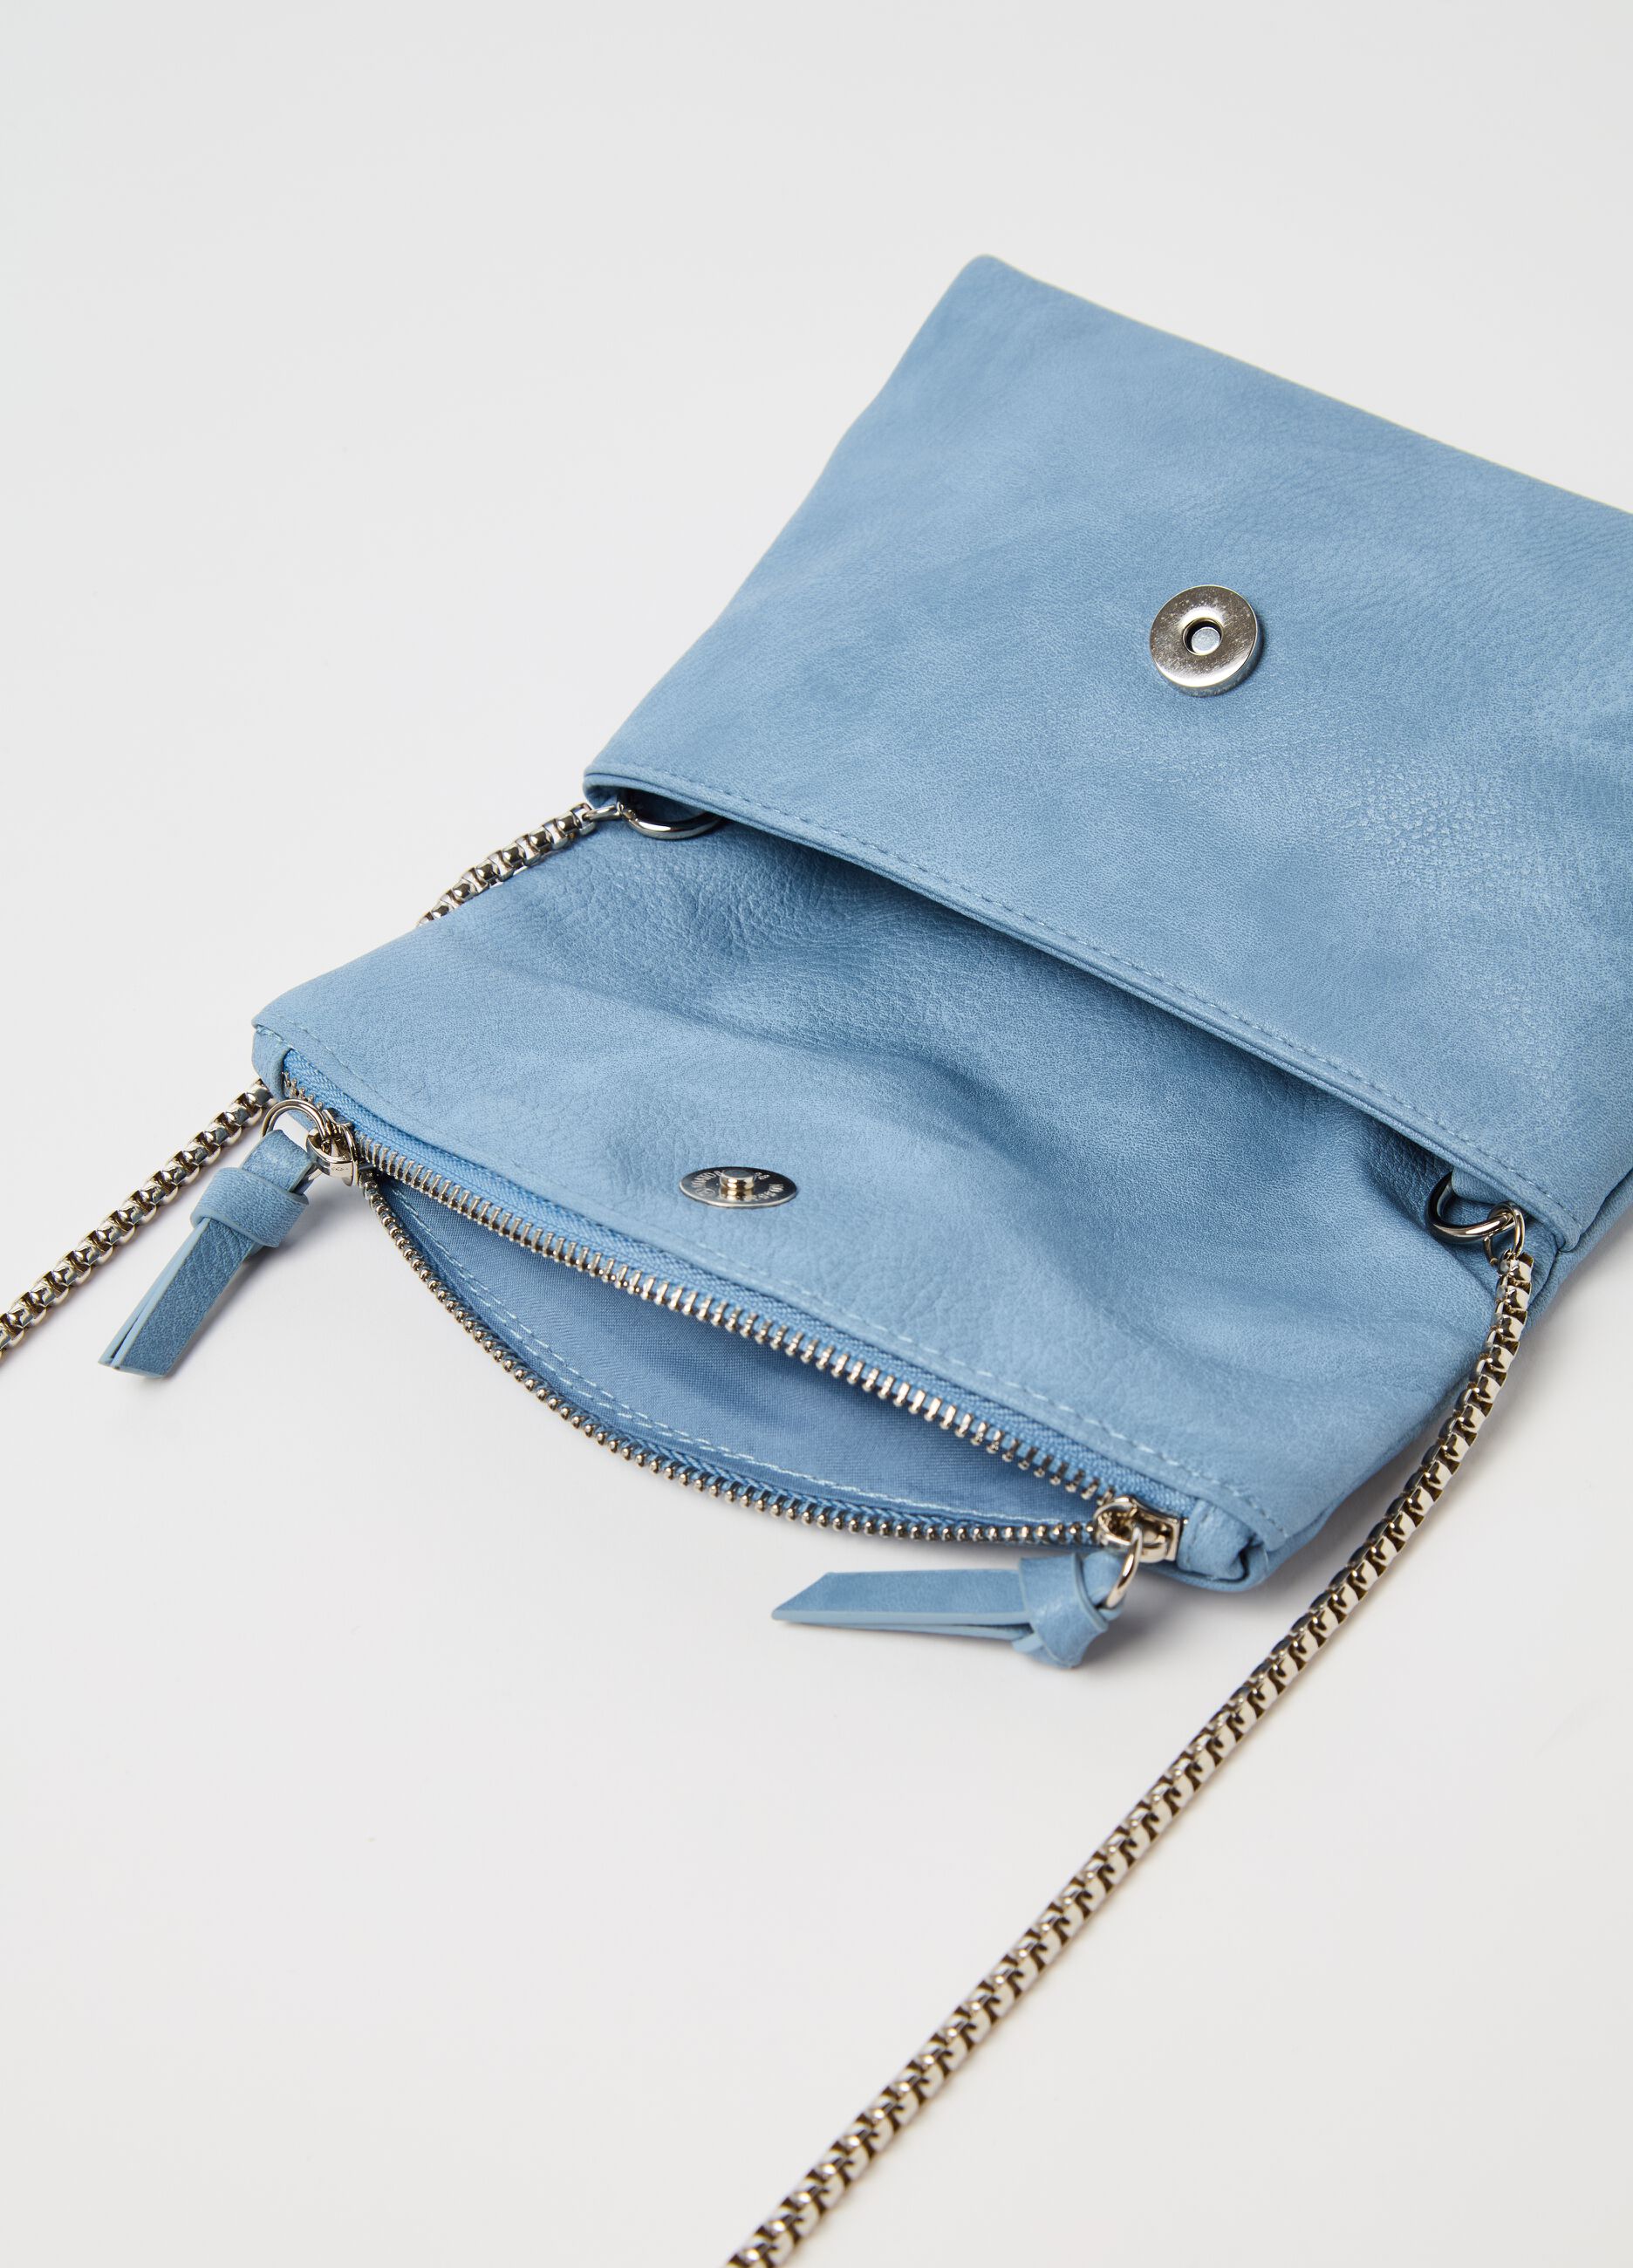 Bag with flap and chain strap